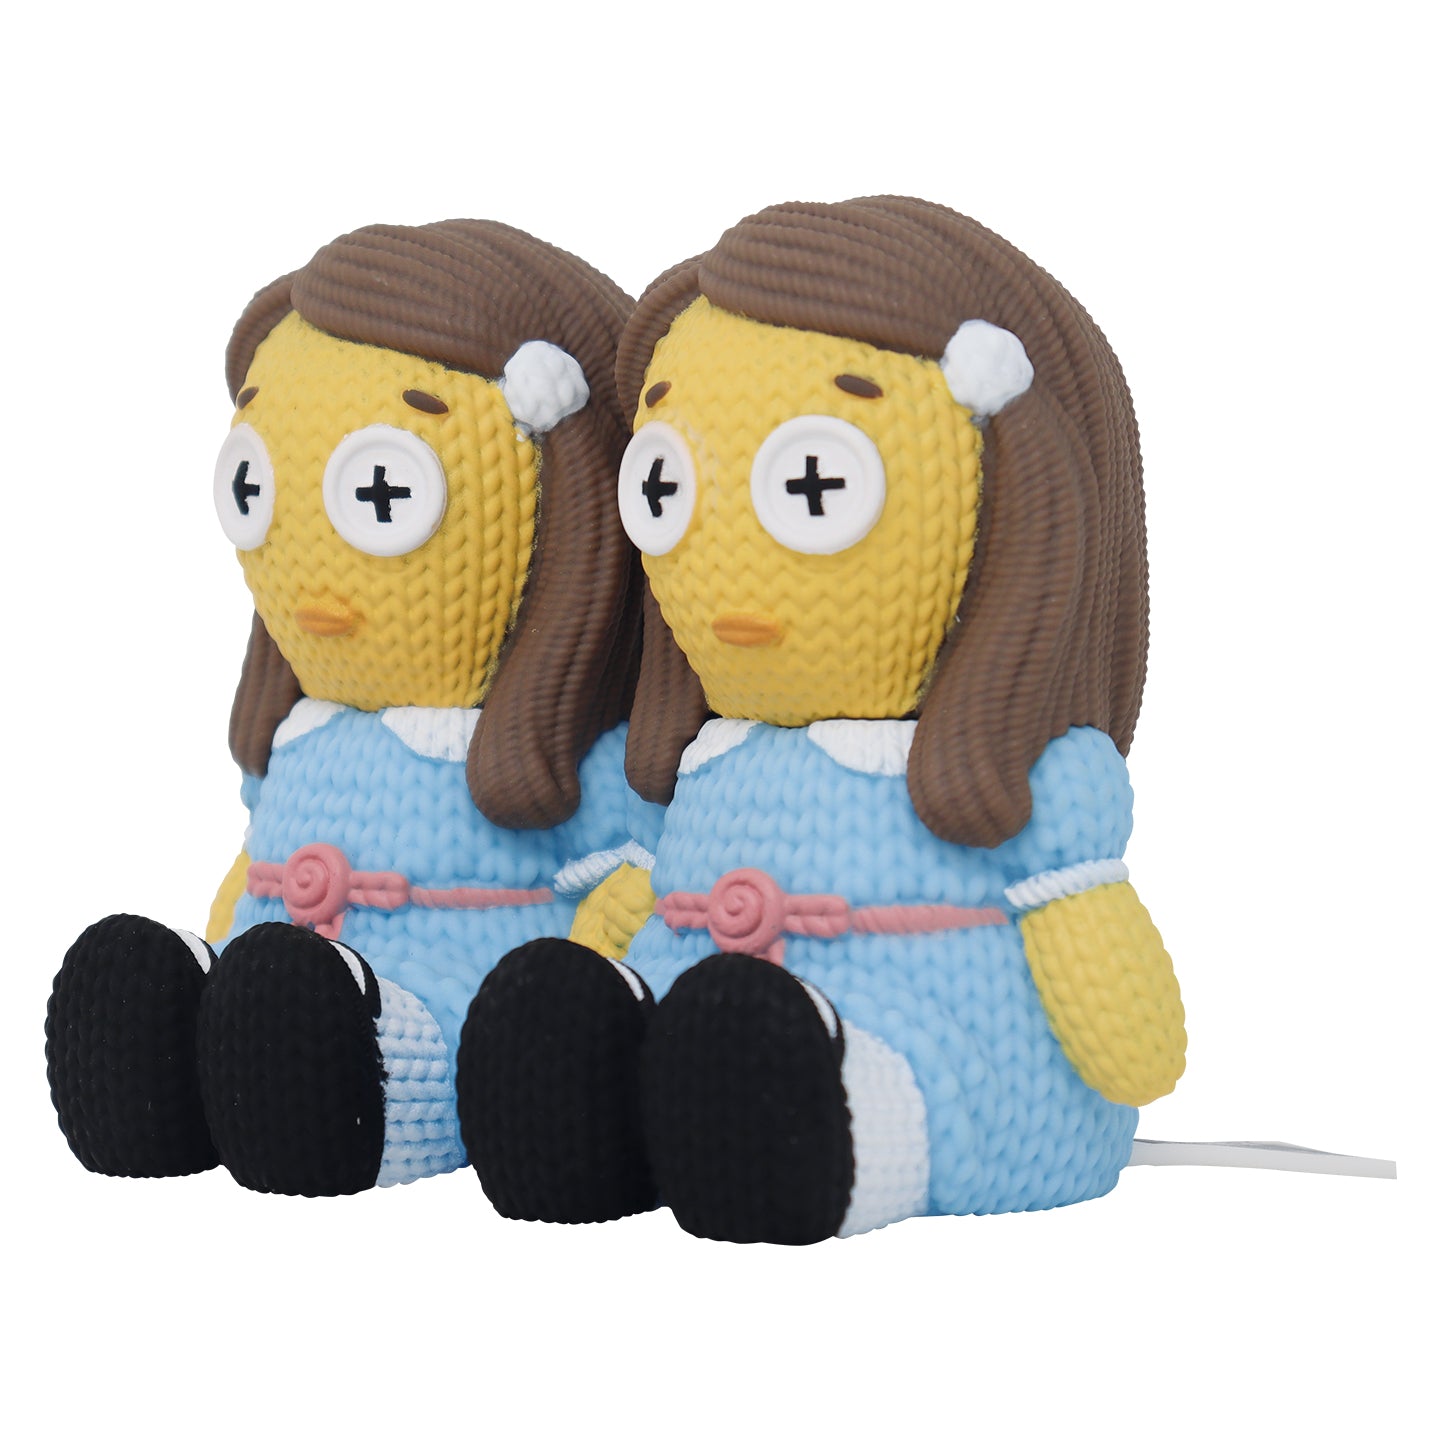 The Shining - The Grady Twins Collectible Vinyl Figure from Handmade By Robots